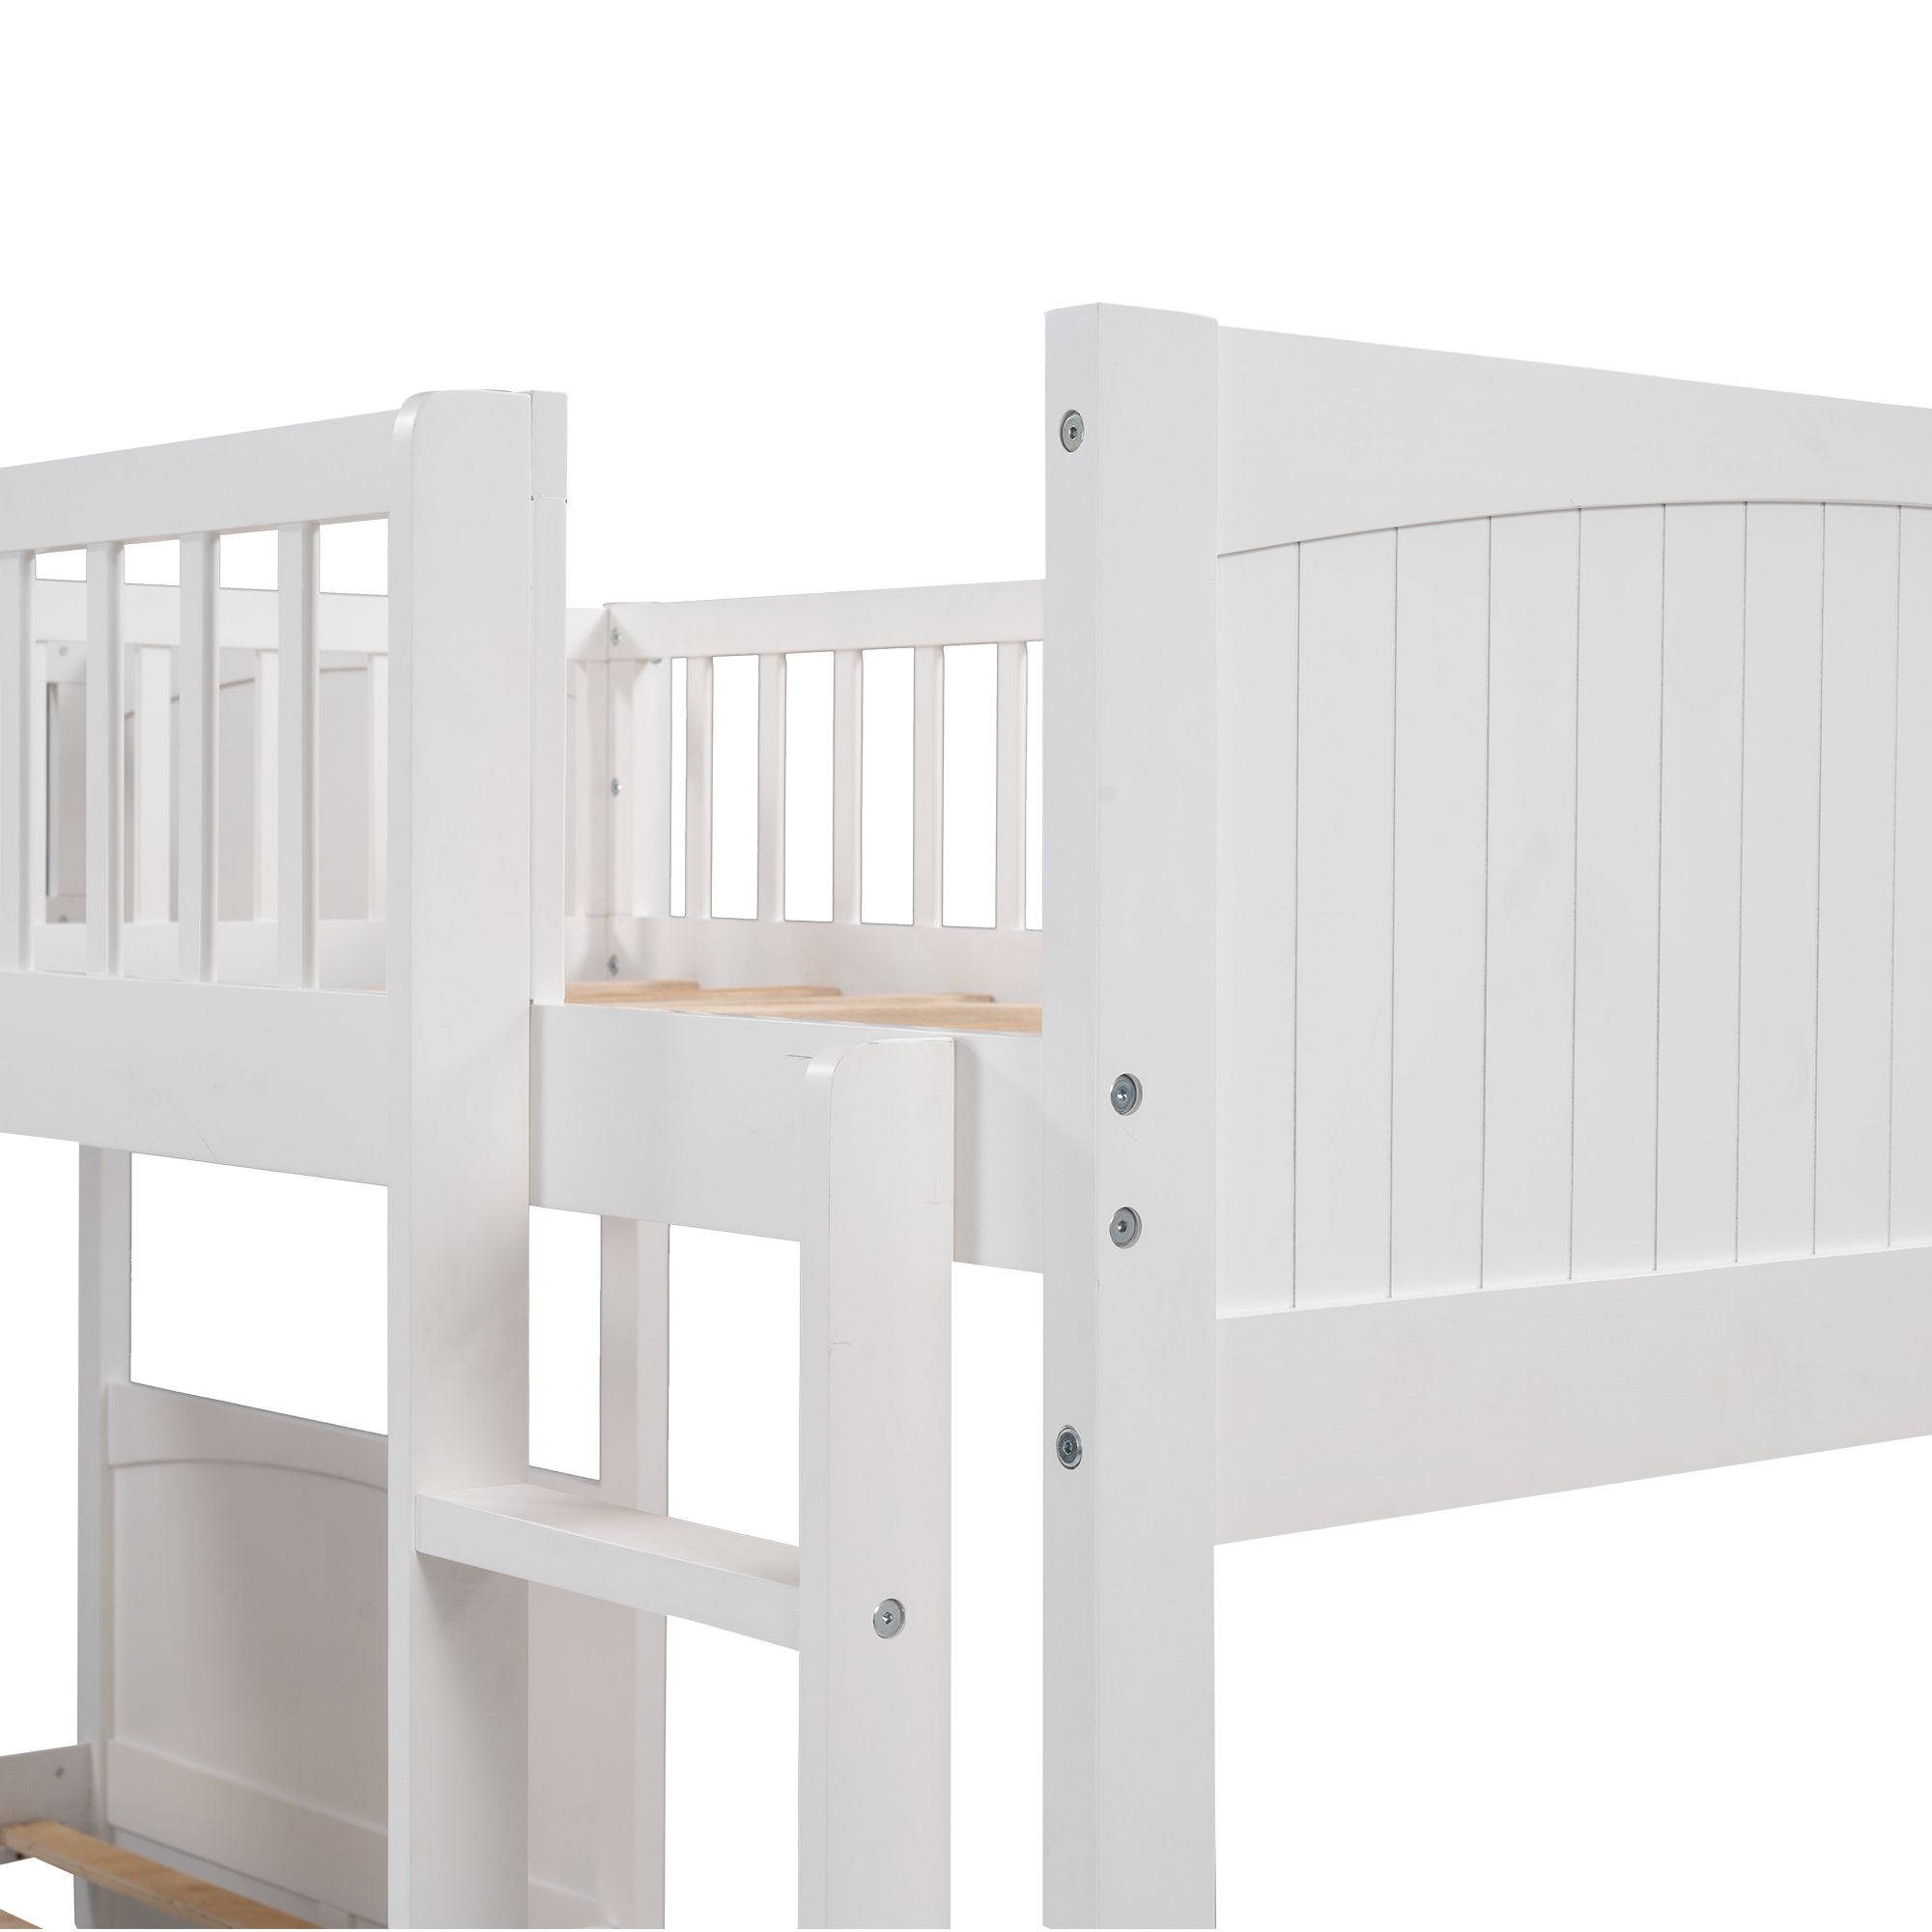 Euroco Wood Bunk Bed Storage, Twin-over-Twin-over-Twin for Children's Bedroom, White - image 9 of 12